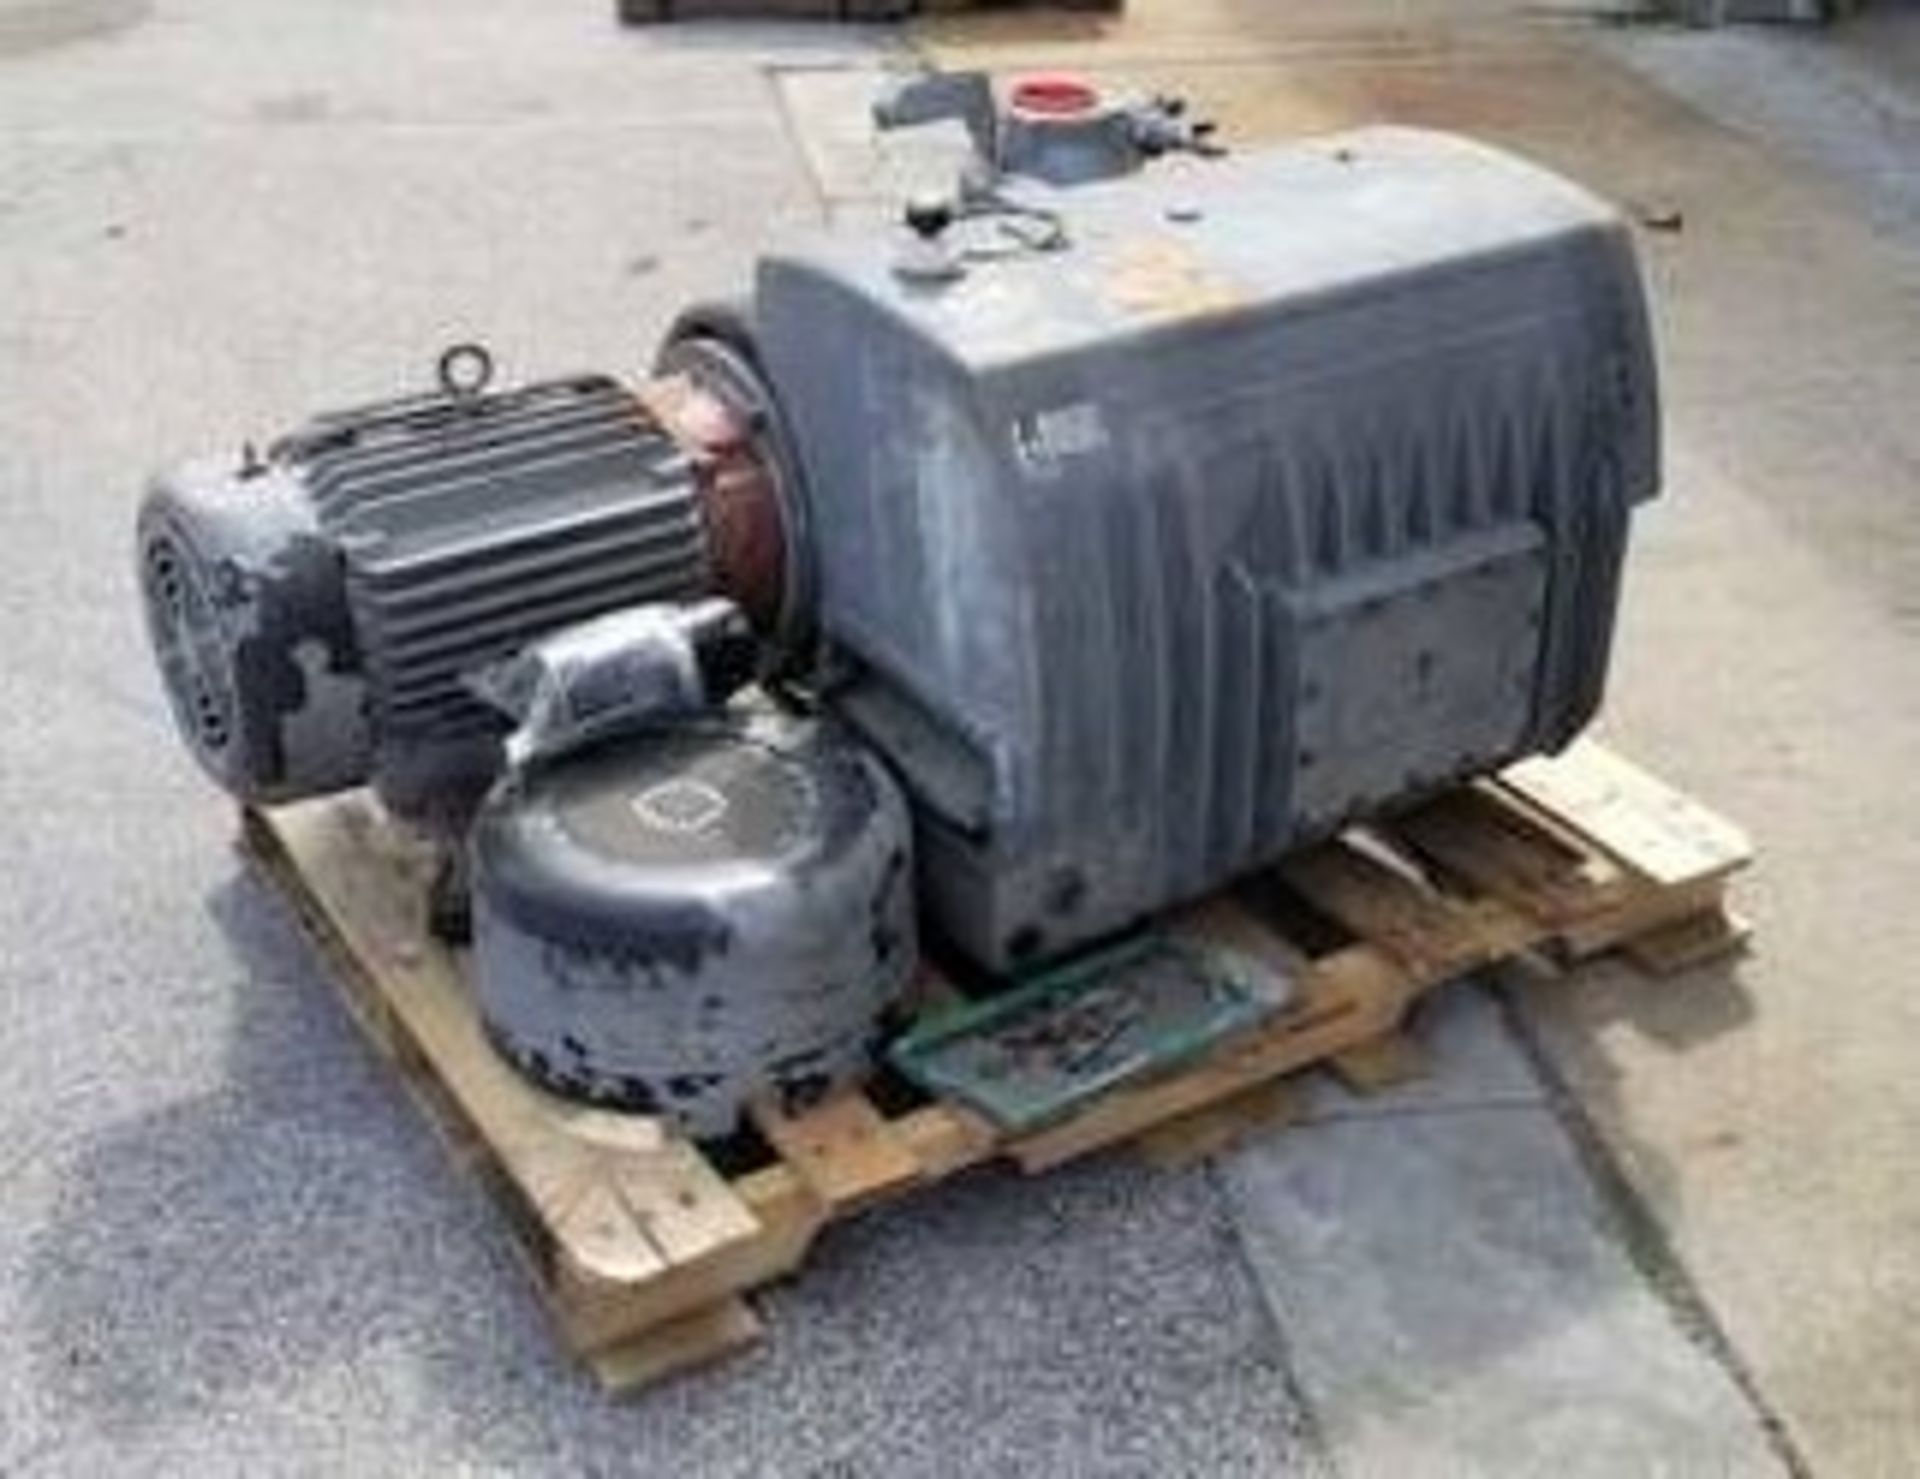 Busch RAO 400 Vacuum Pump. Reconditioned 15 HP motor. Pump is in process of being reconditioned.